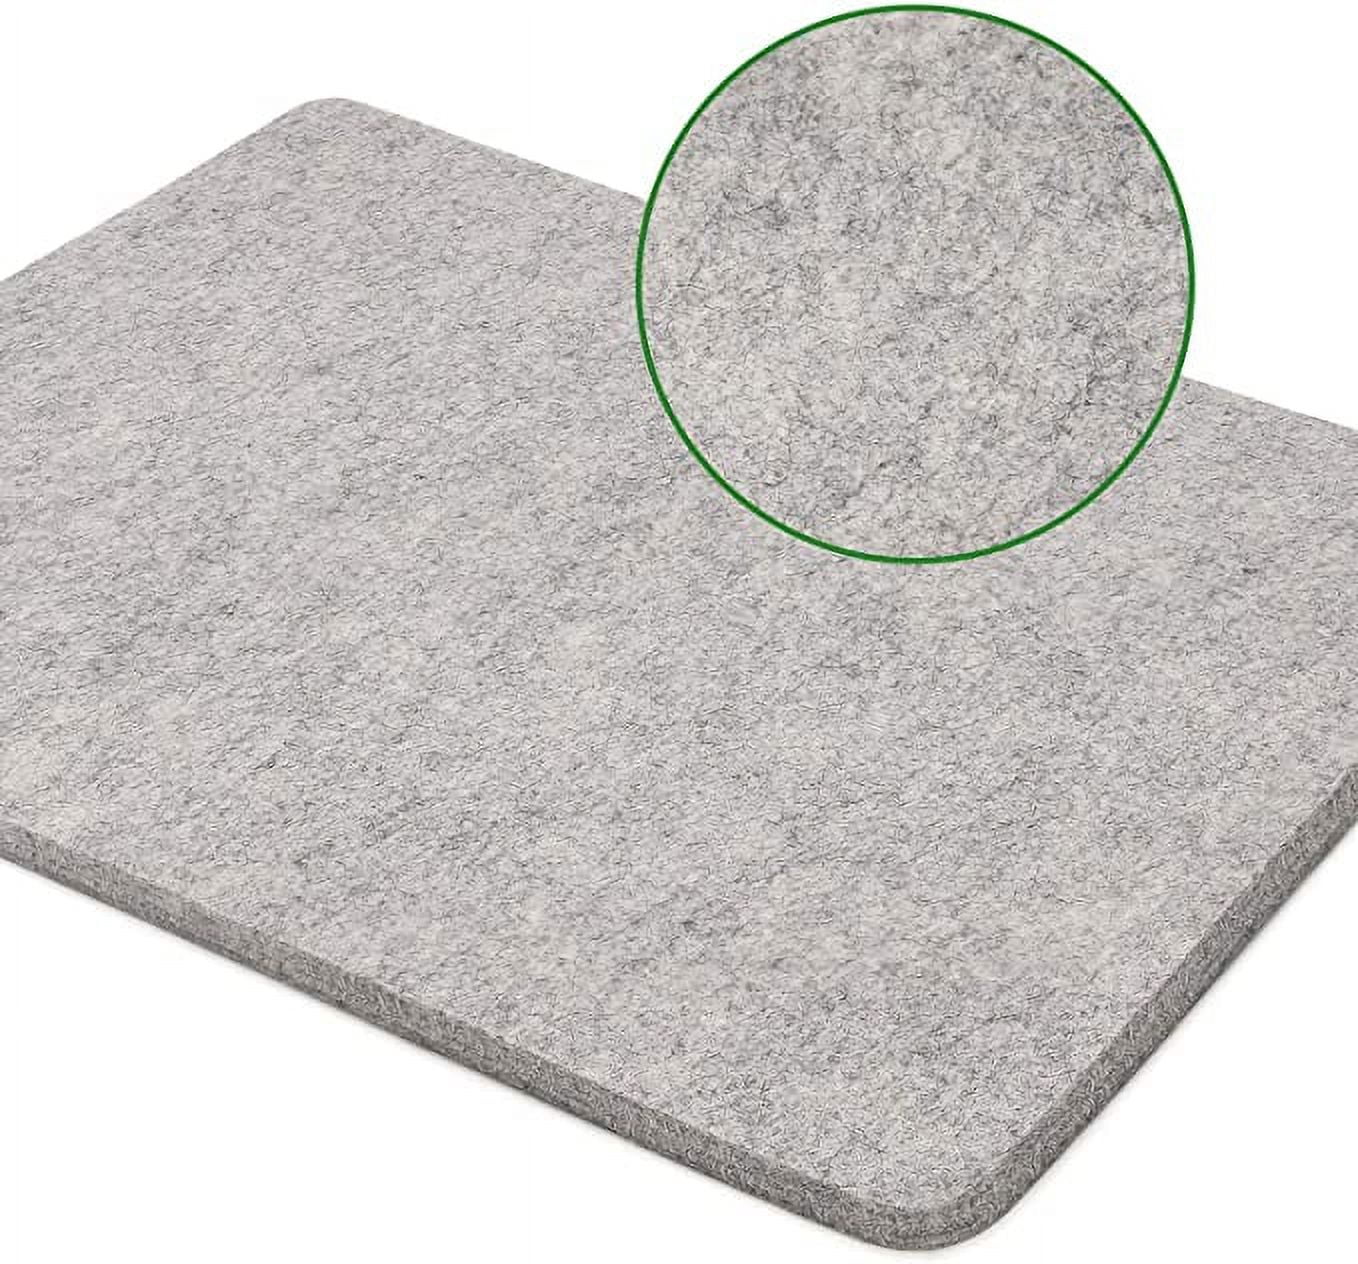 17''x13.5'' Wool Pressing Mat for Quilting, 100% Wool from New Zealand,  Portable Felted Wool Ironing Mat with a Silicon Iron Rest Pad 